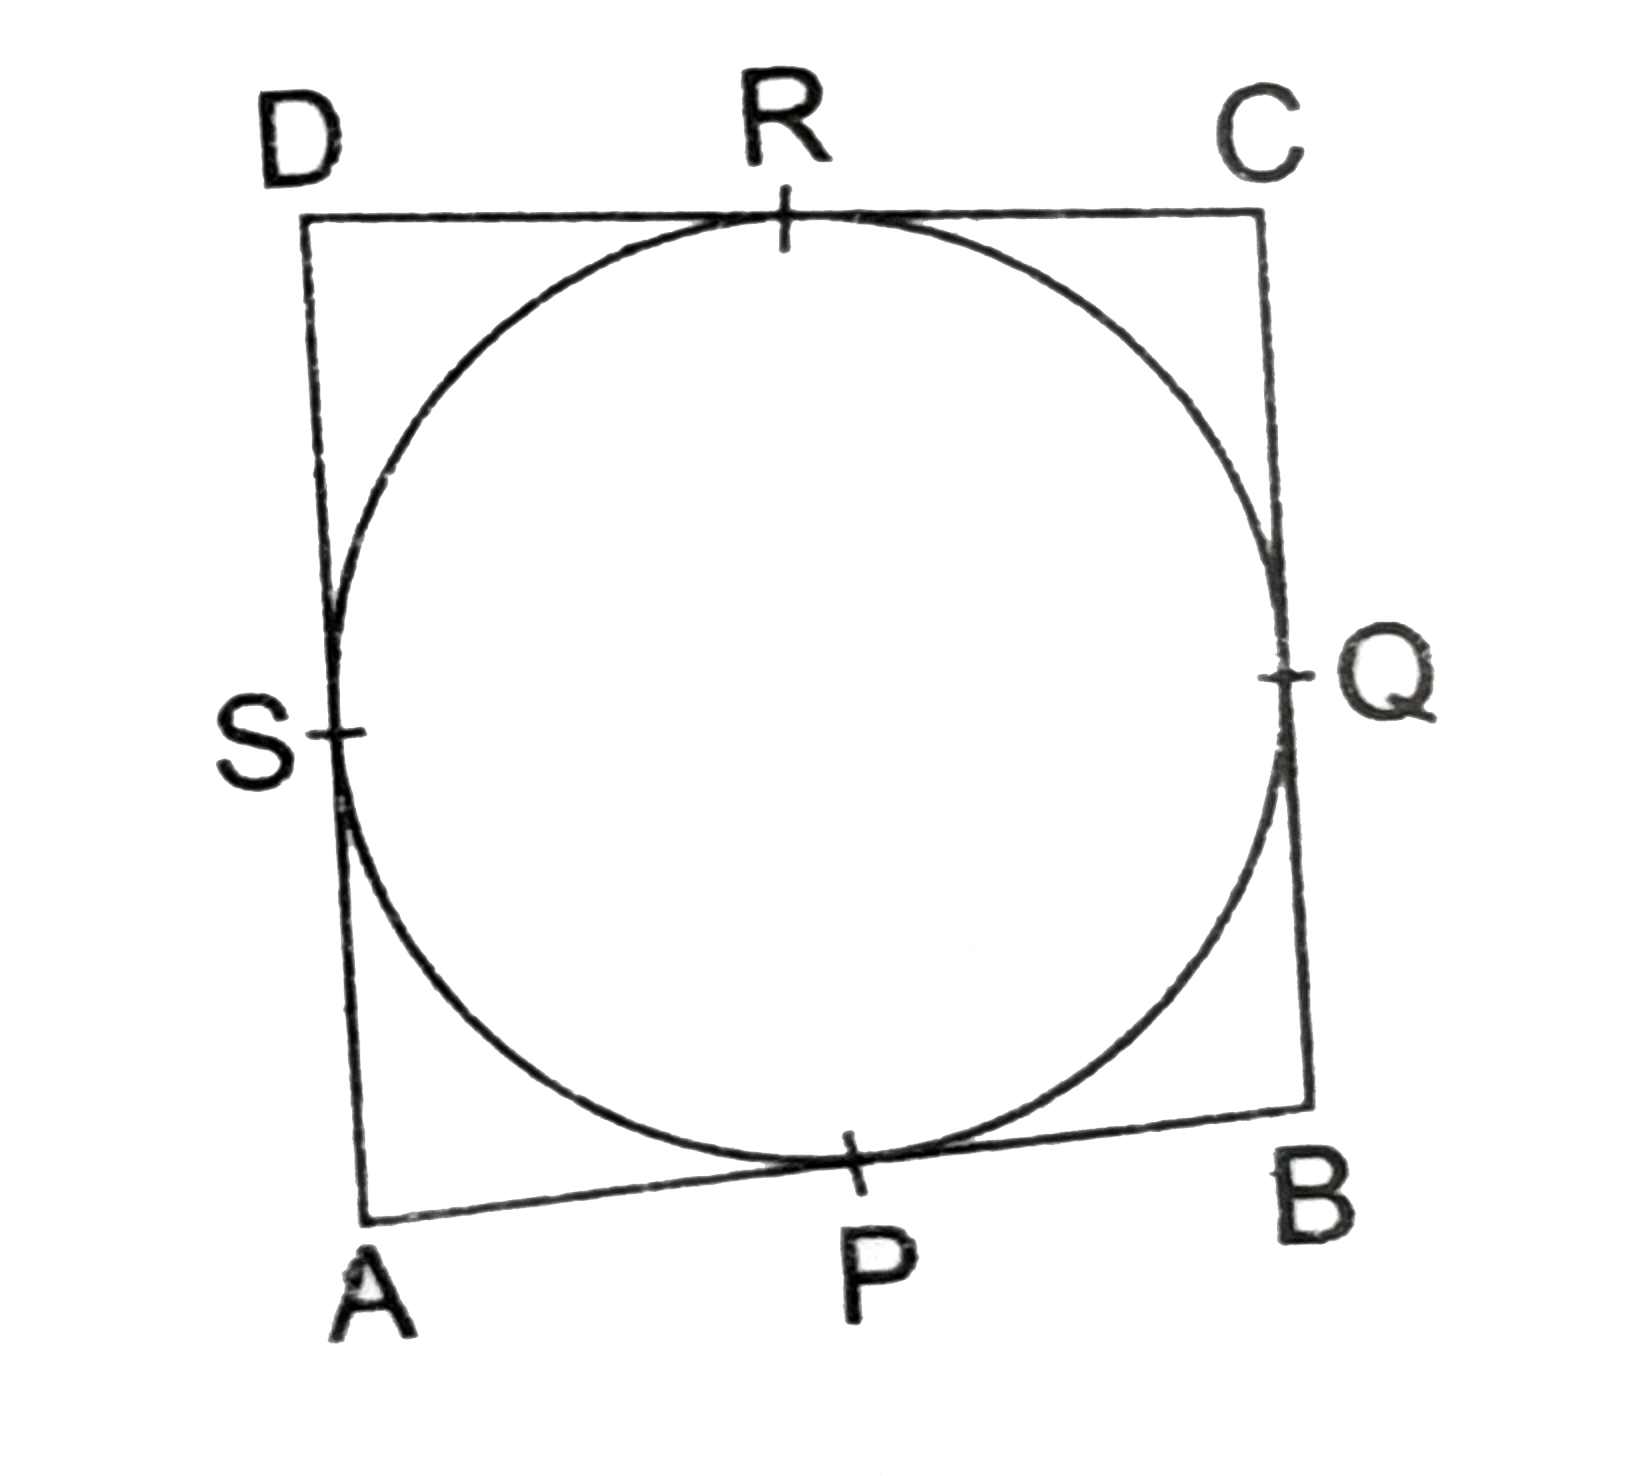 In the given figure, a quadrilateral ABCD is drawn to circumscribe a circle such that its sides AB, BC, CD and AD touch the circle at P,Q,R and S respectively. If AB=x cm, BC=7cm, CR=3cm and AS=5cm, find x.